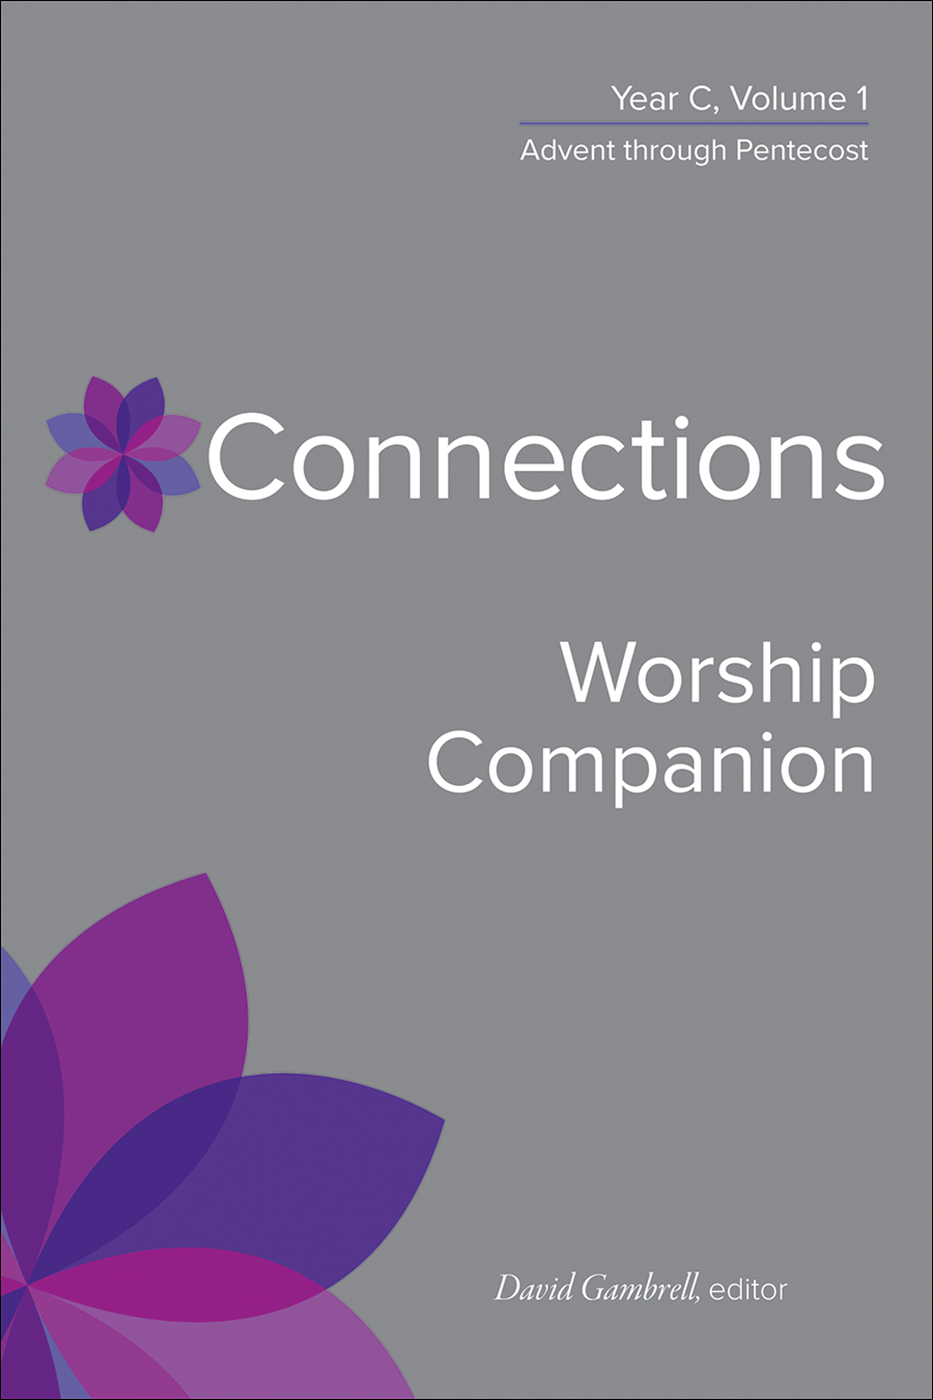 Connections Worship Companion, Year C volume 1